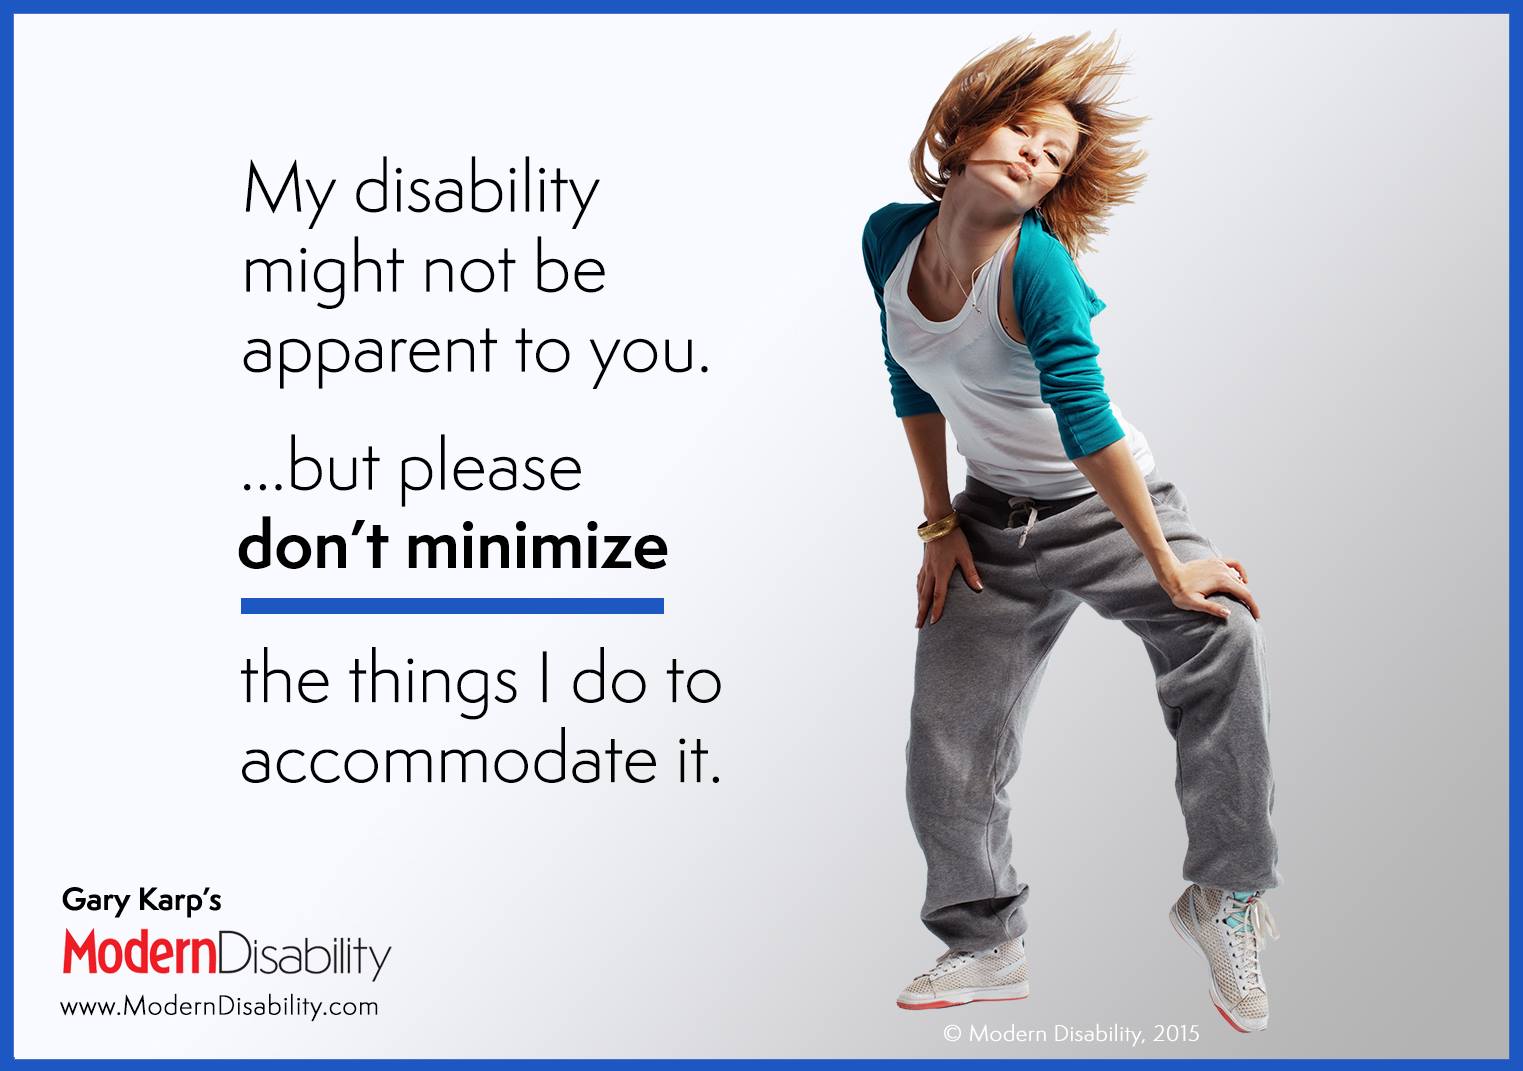 A young woman in a dance pose wearing sweatpants and the text, "My disability might not be apparent to you, but please don't minimize the things I do to accommodate it."